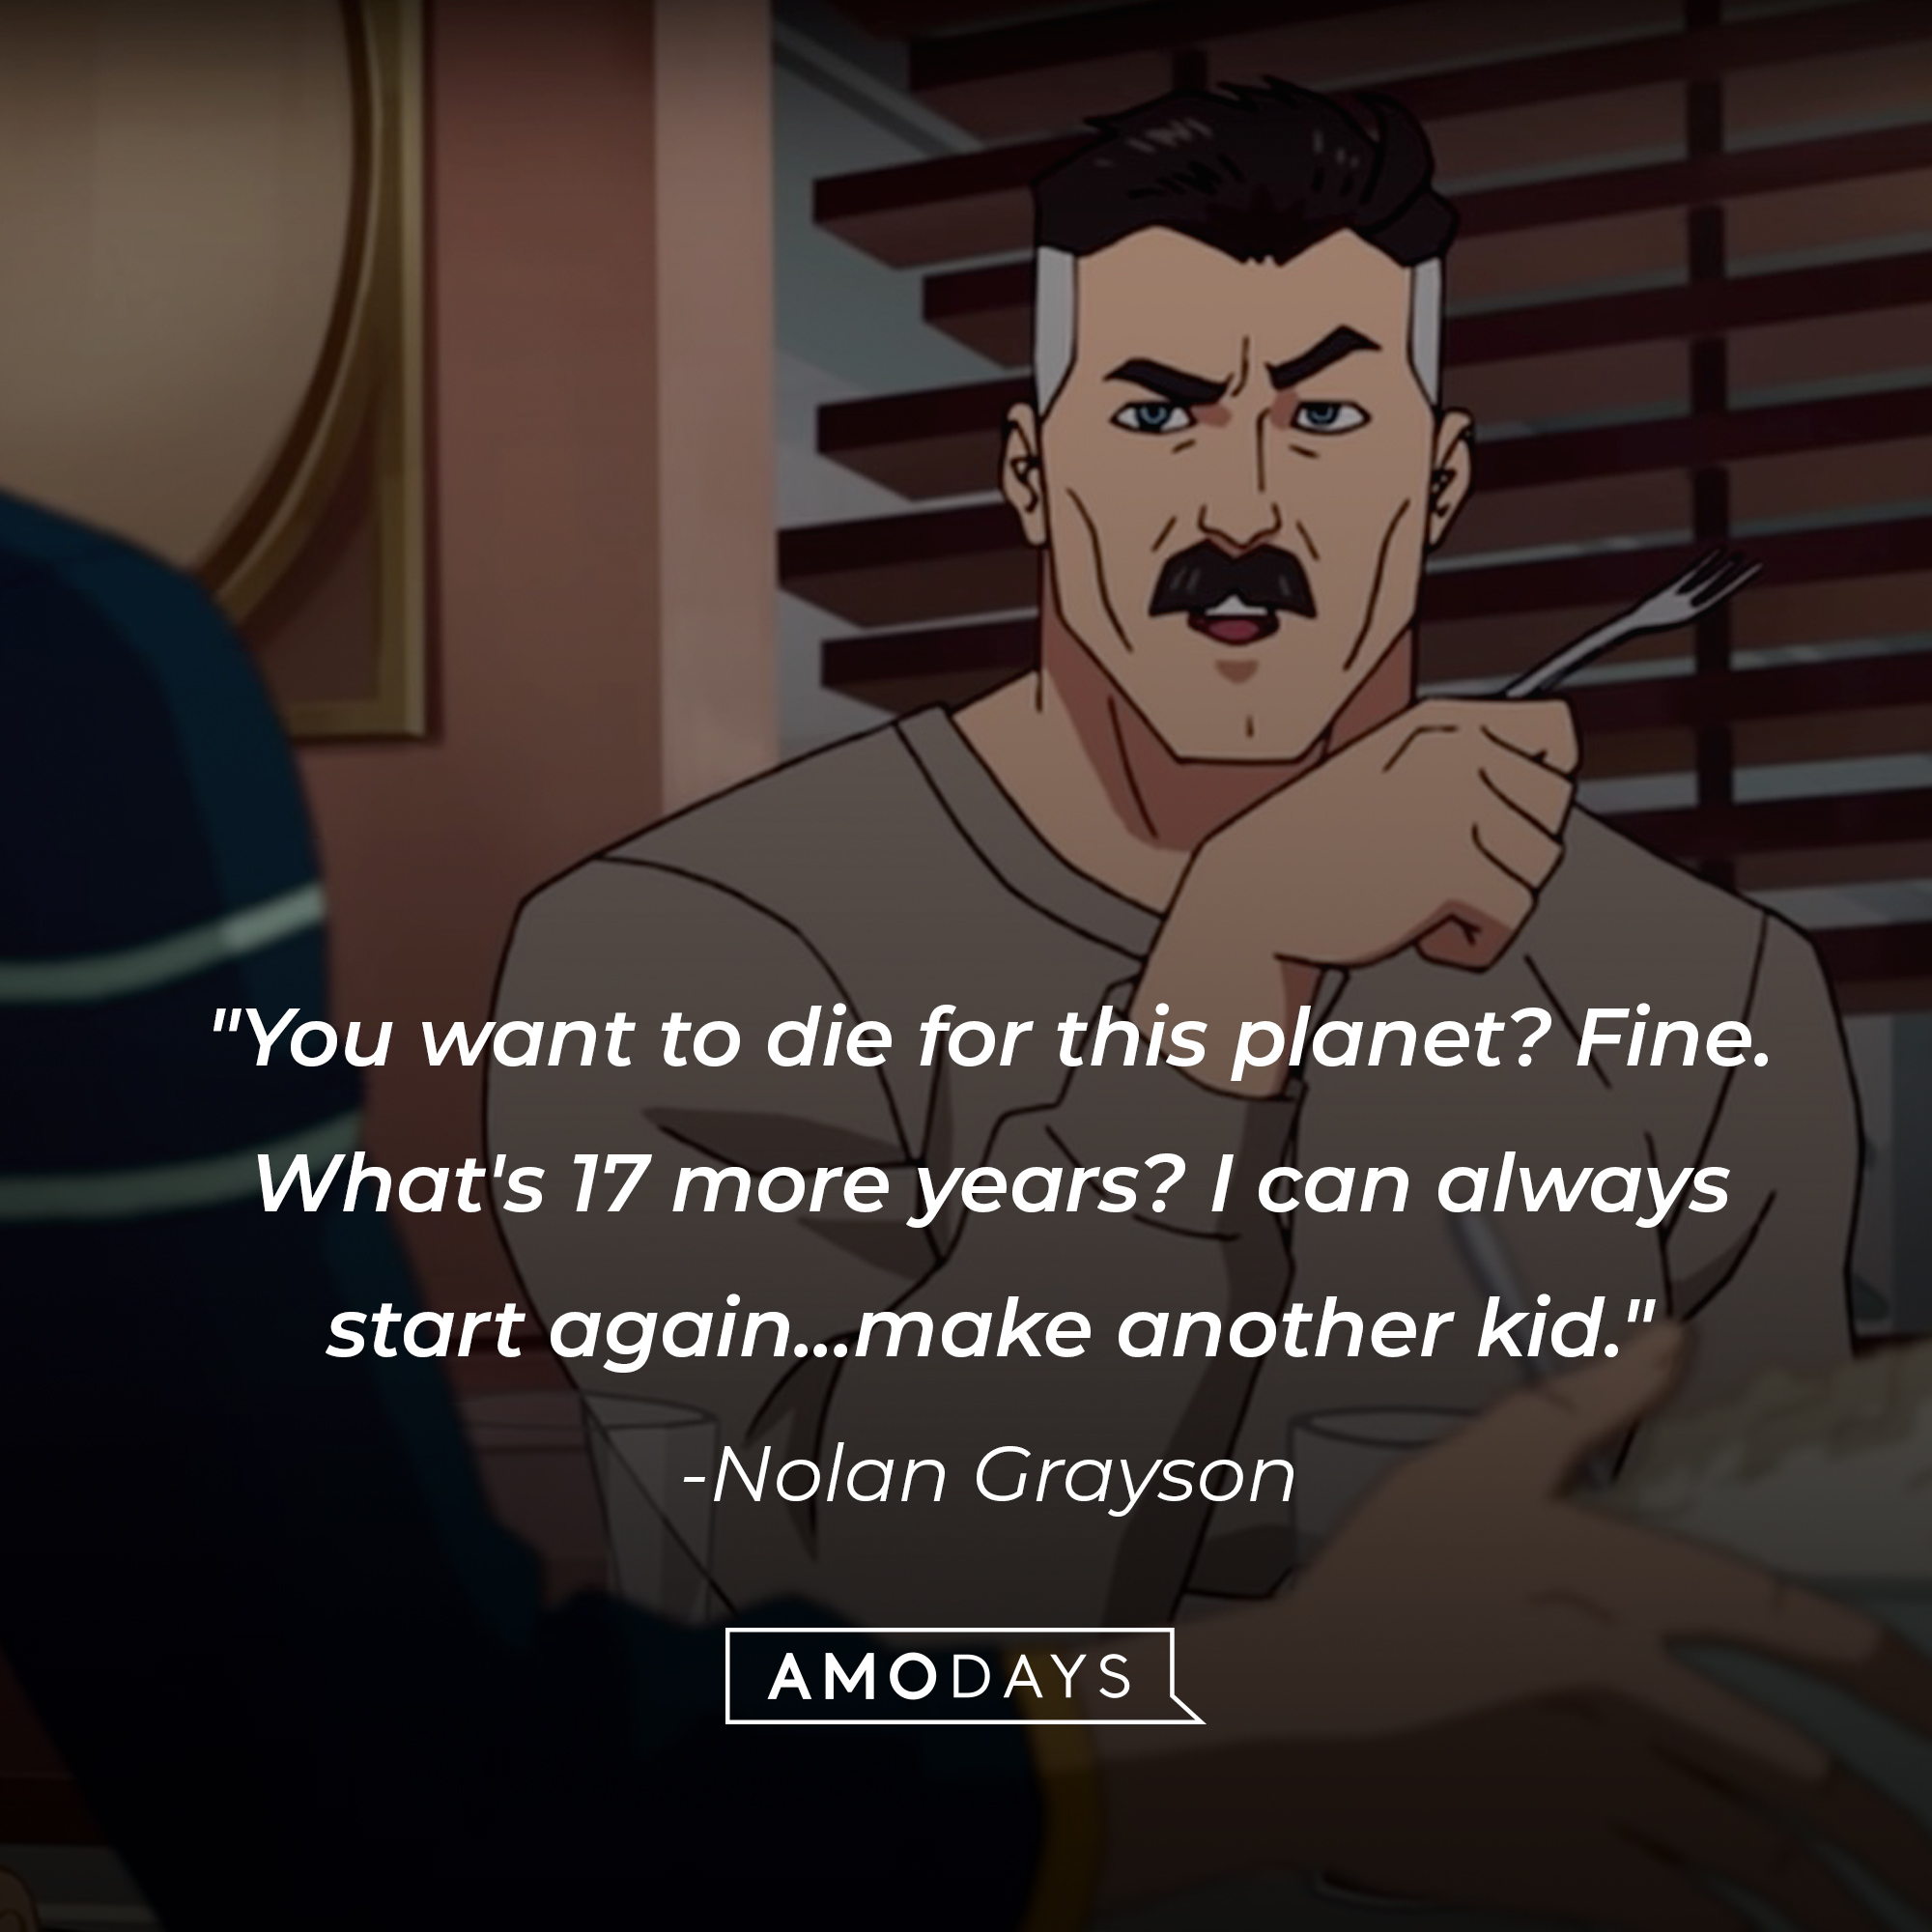 Nolan Grayson's quote: "You want to die for this planet? Fine. What's 17 more years? I can always start again... make another kid." | Source: Facebook.com/Invincibleuniverse